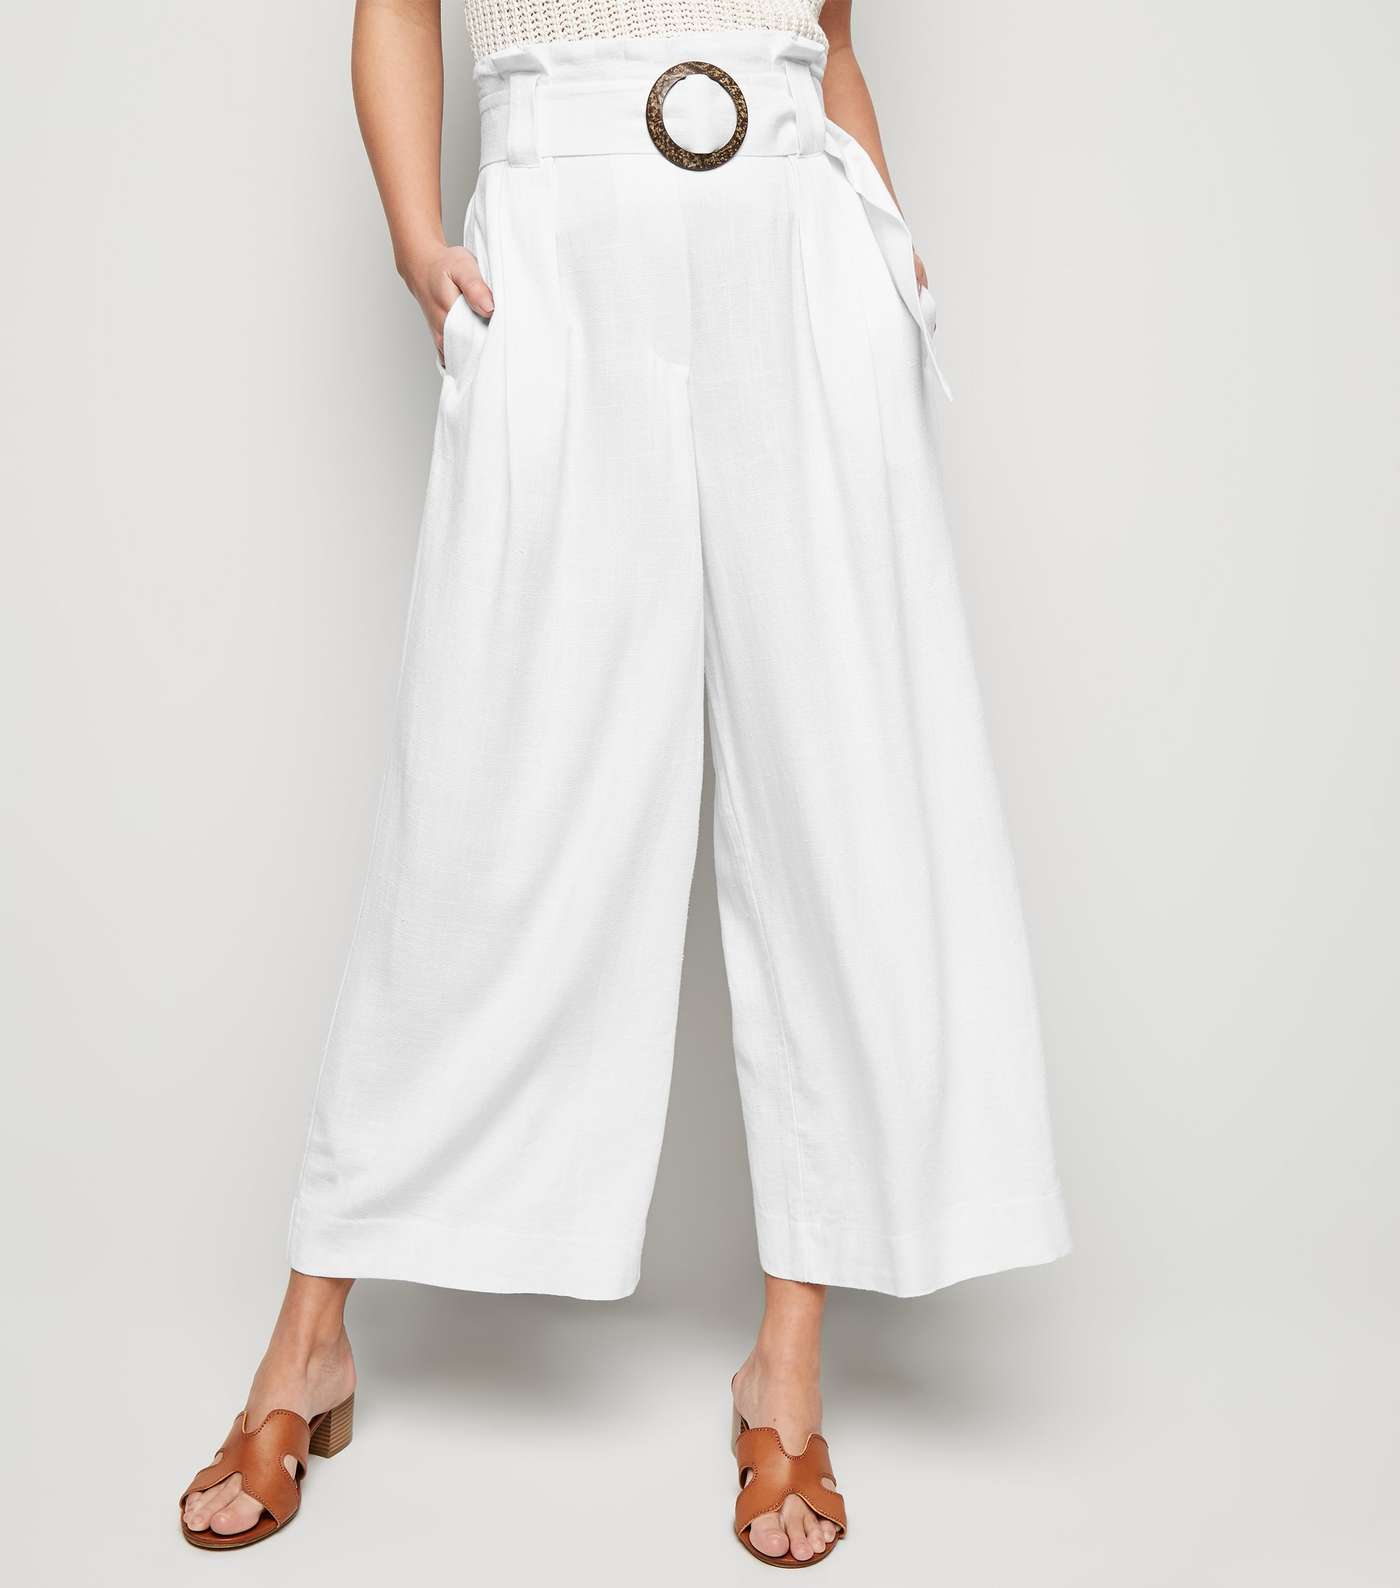 White Linen Look Crop Trousers Image 2